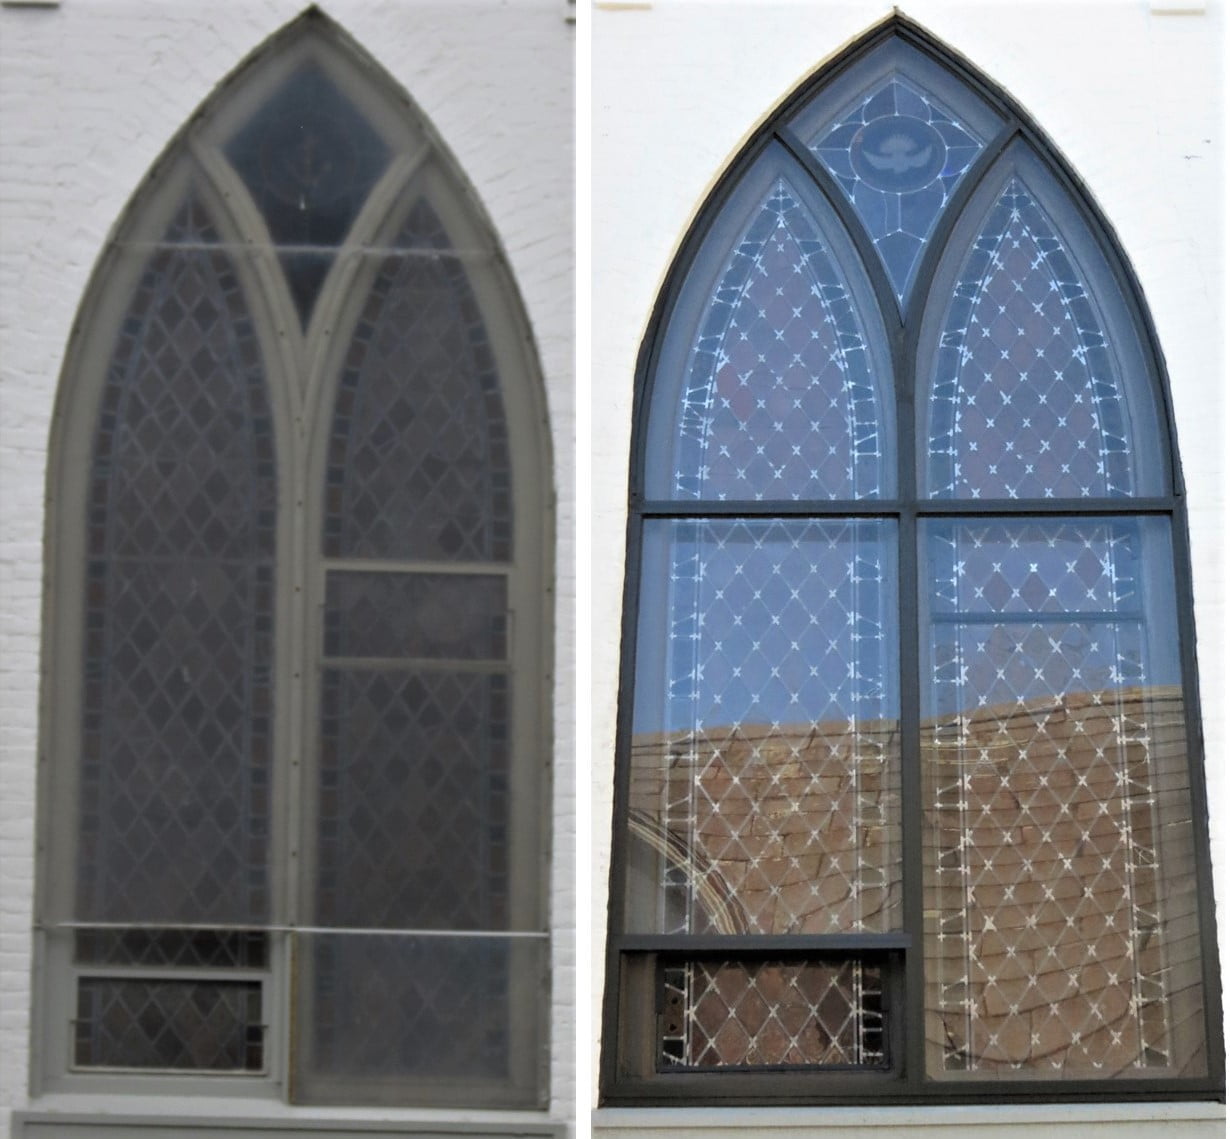 church stained glass window protective coverings, church stained glass windows